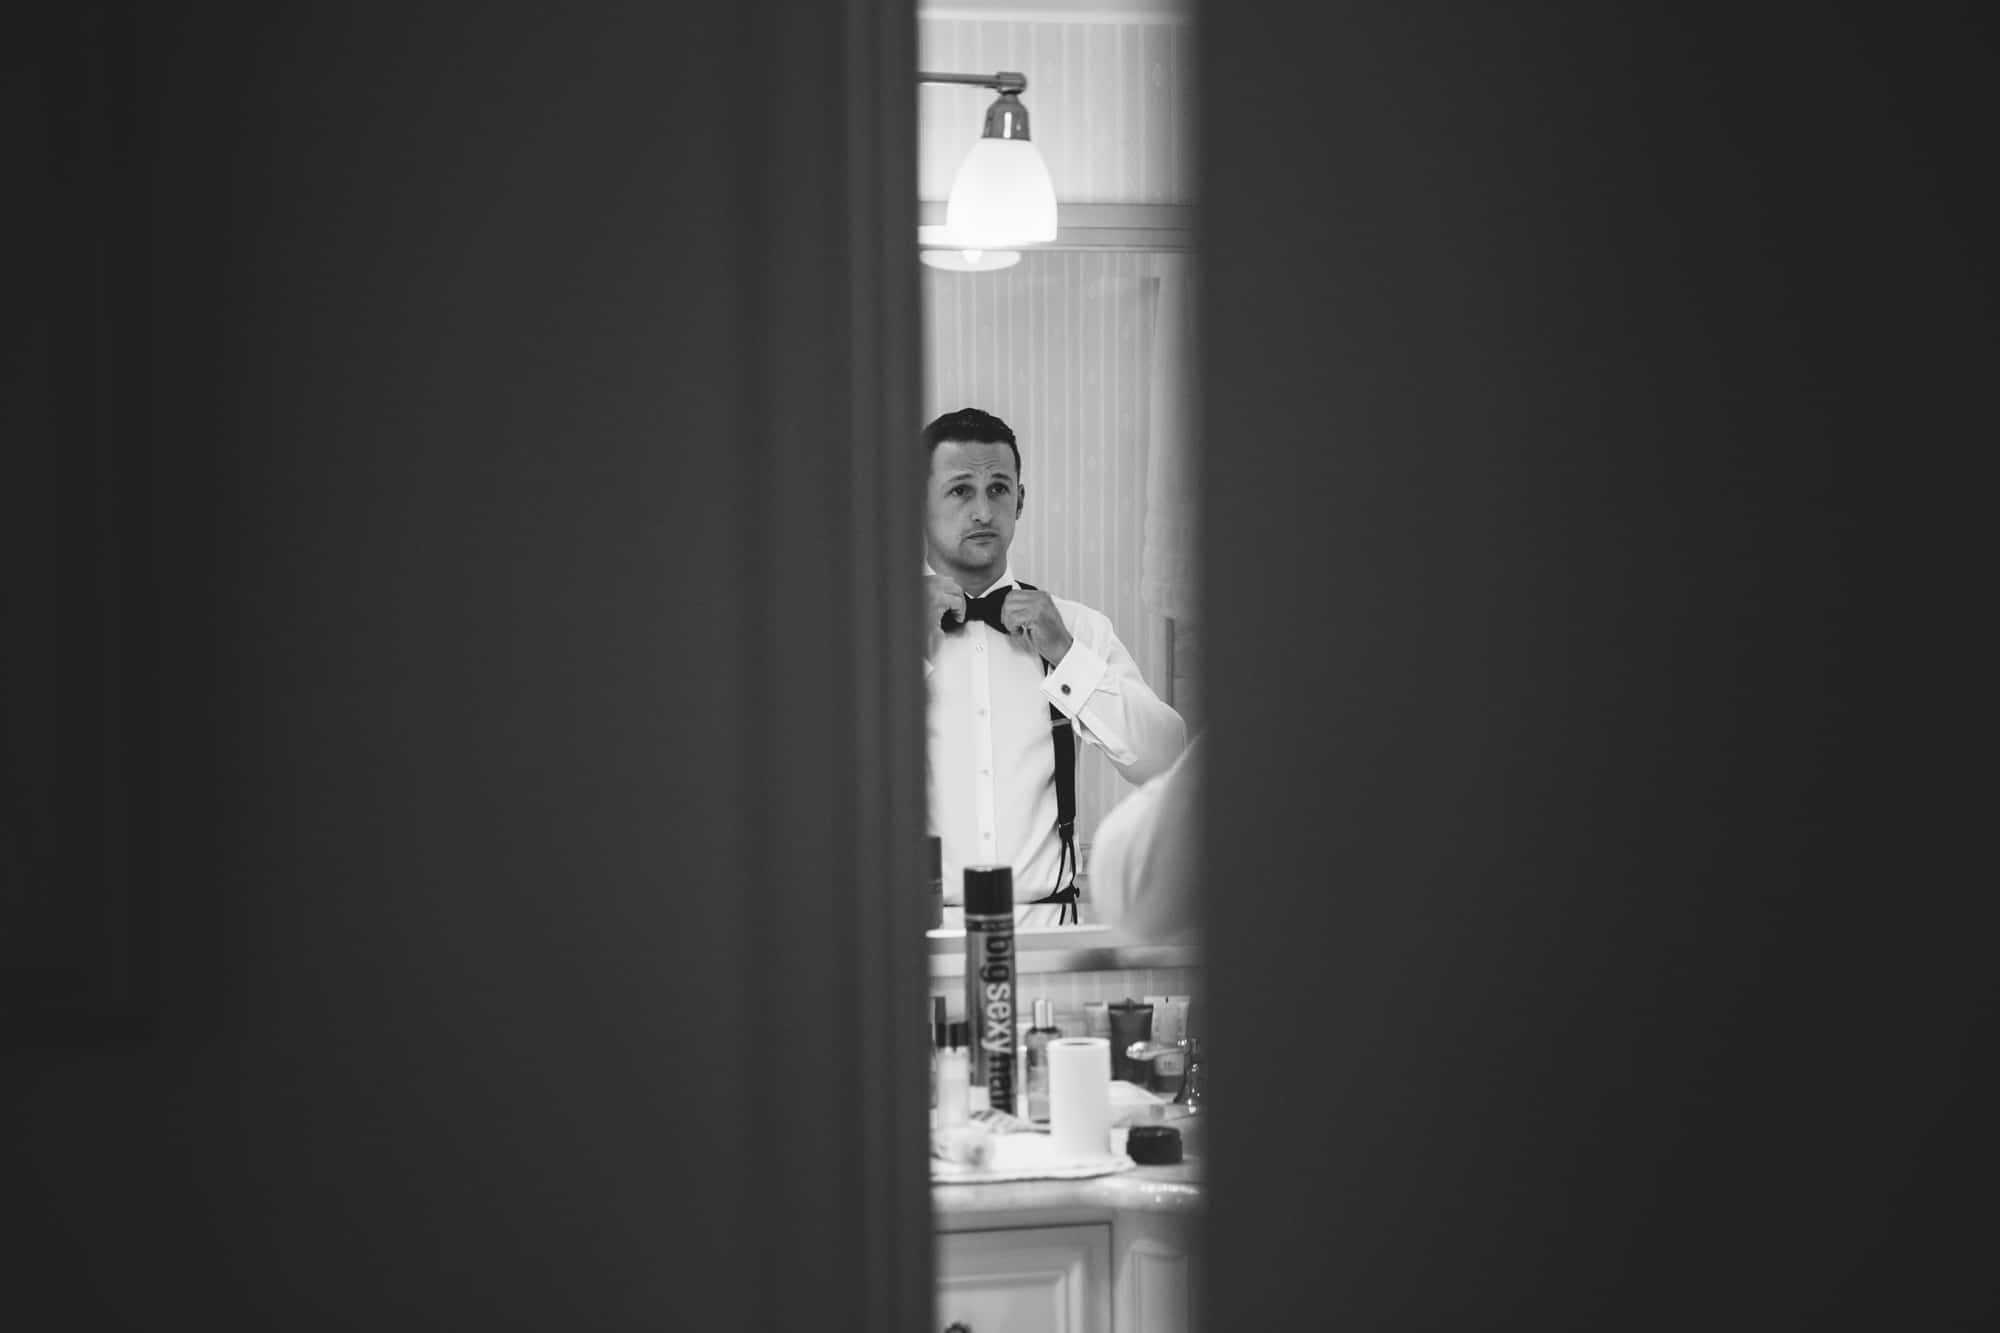 This documentary photograph of a groom putting on his bow tie is one of the best wedding photographs of 2016